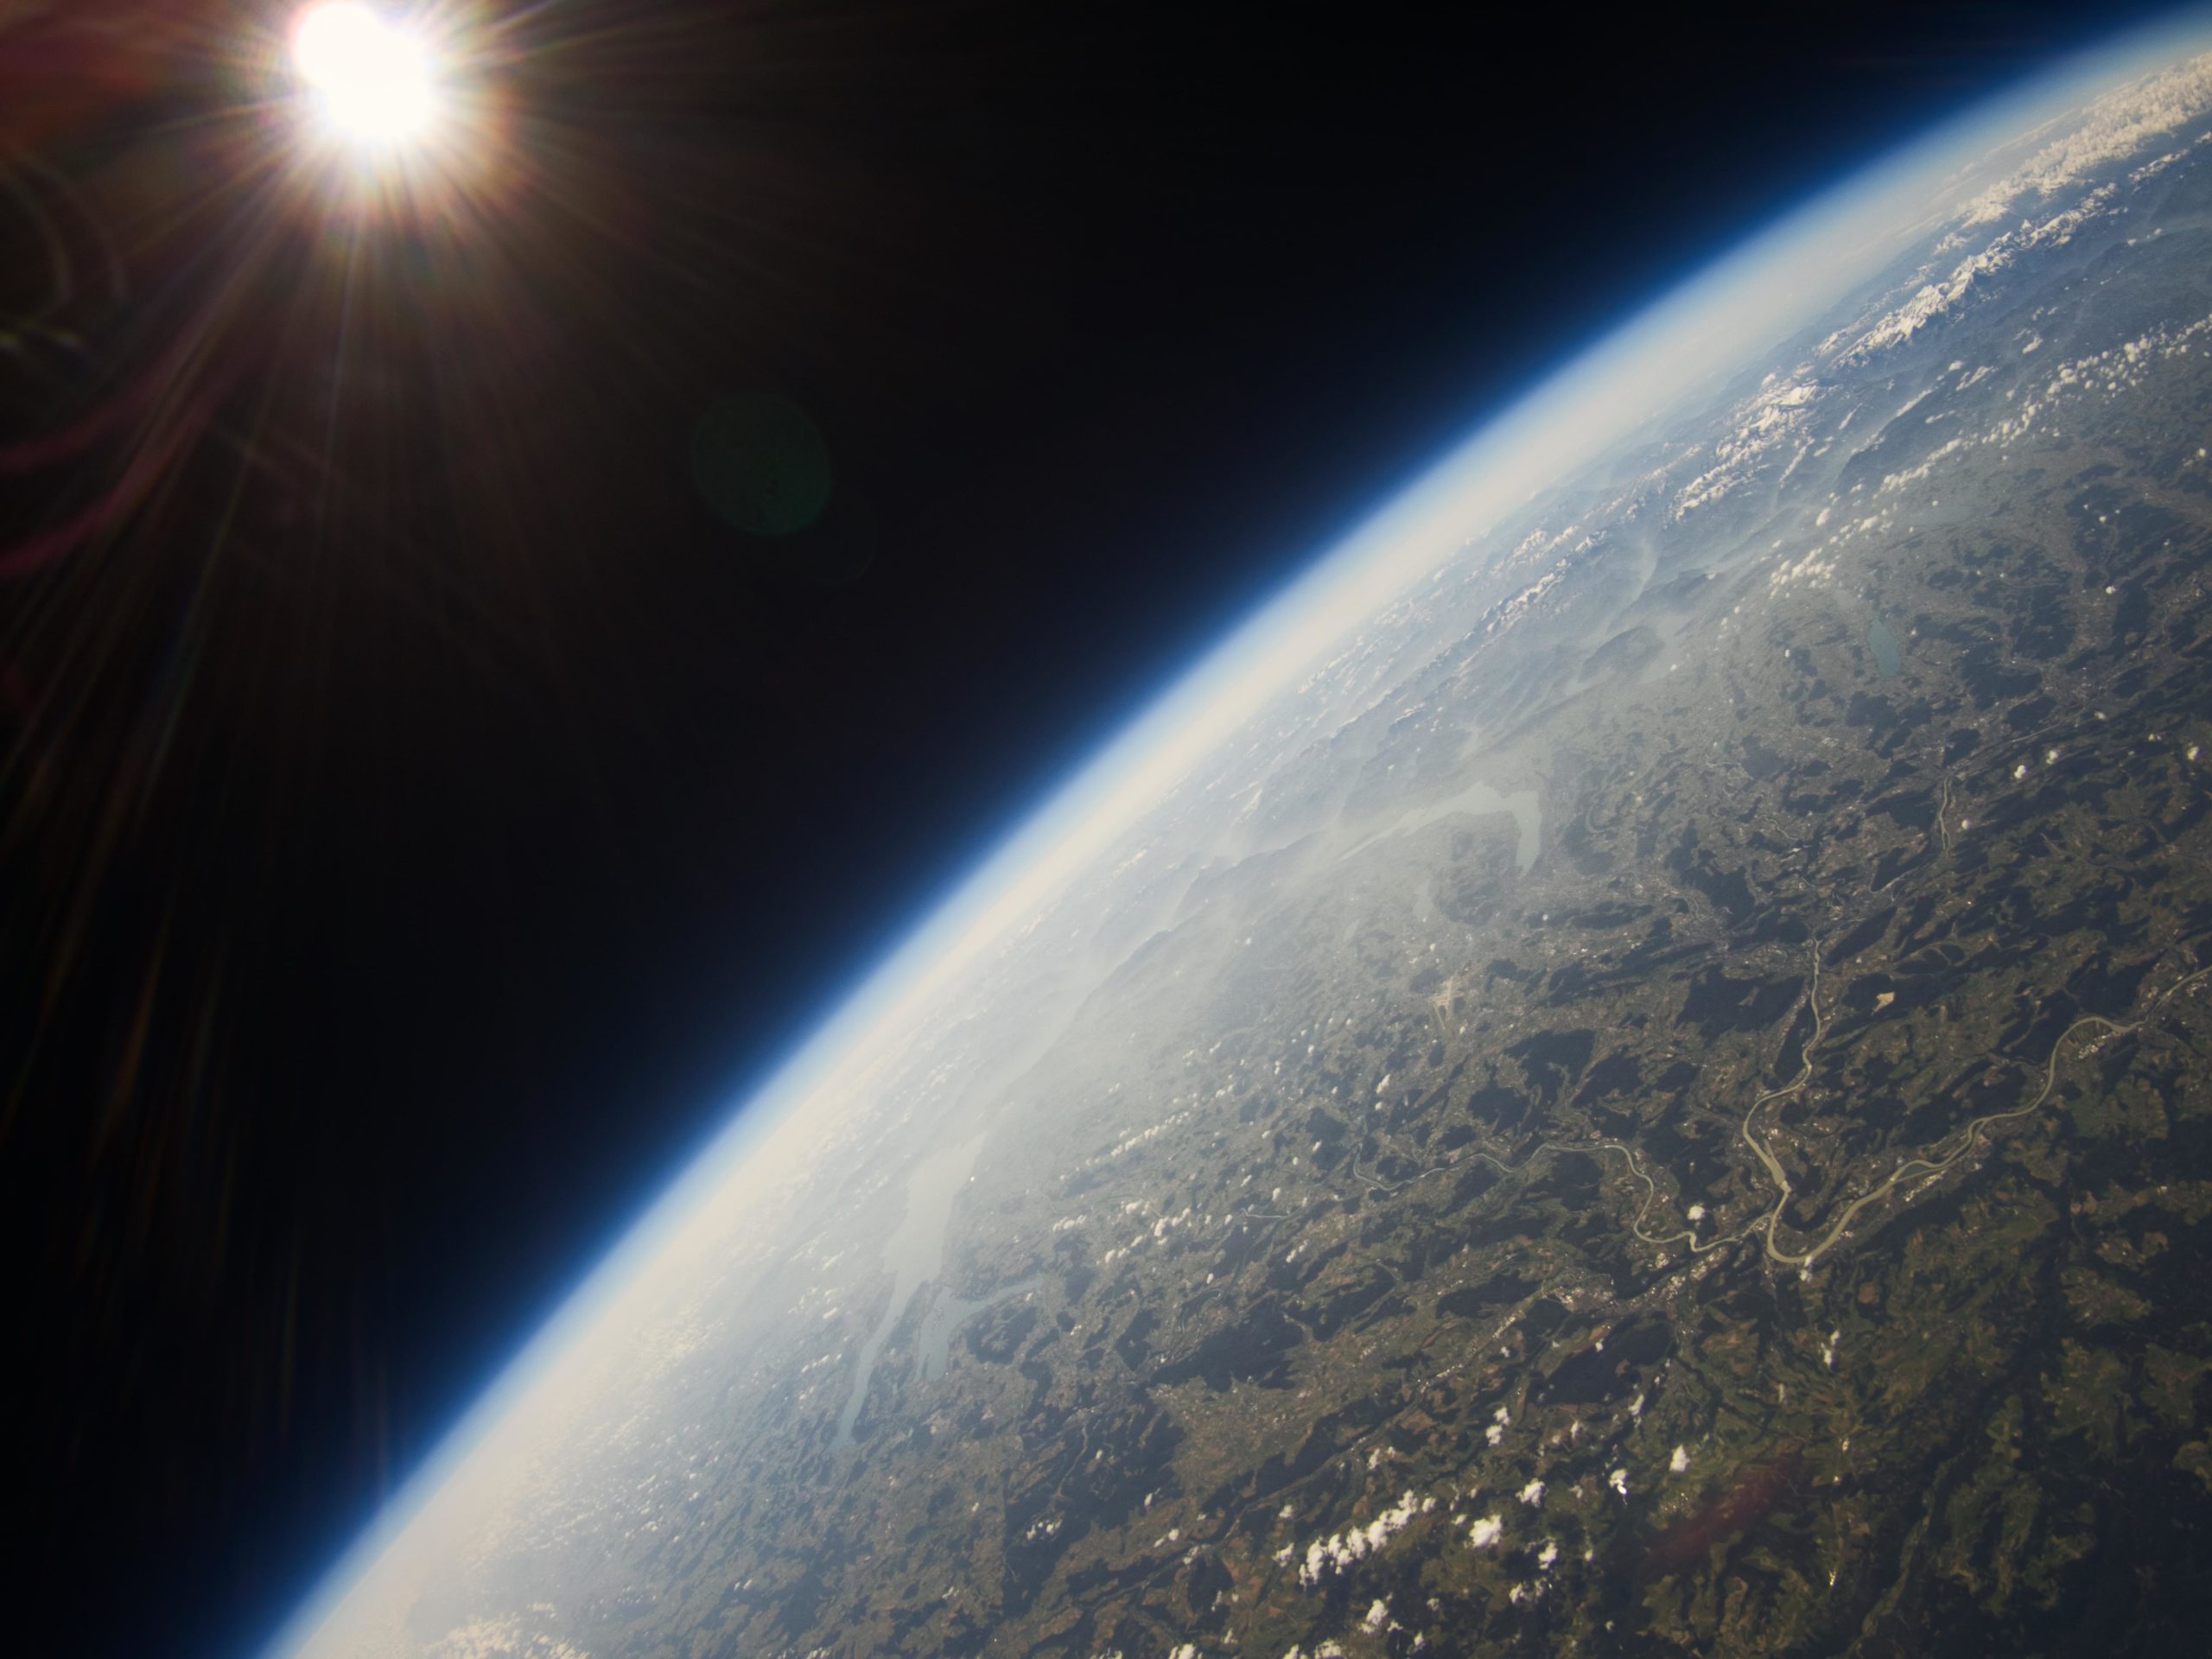 Image from the stratosphere from the THEO-1 spacecraft.